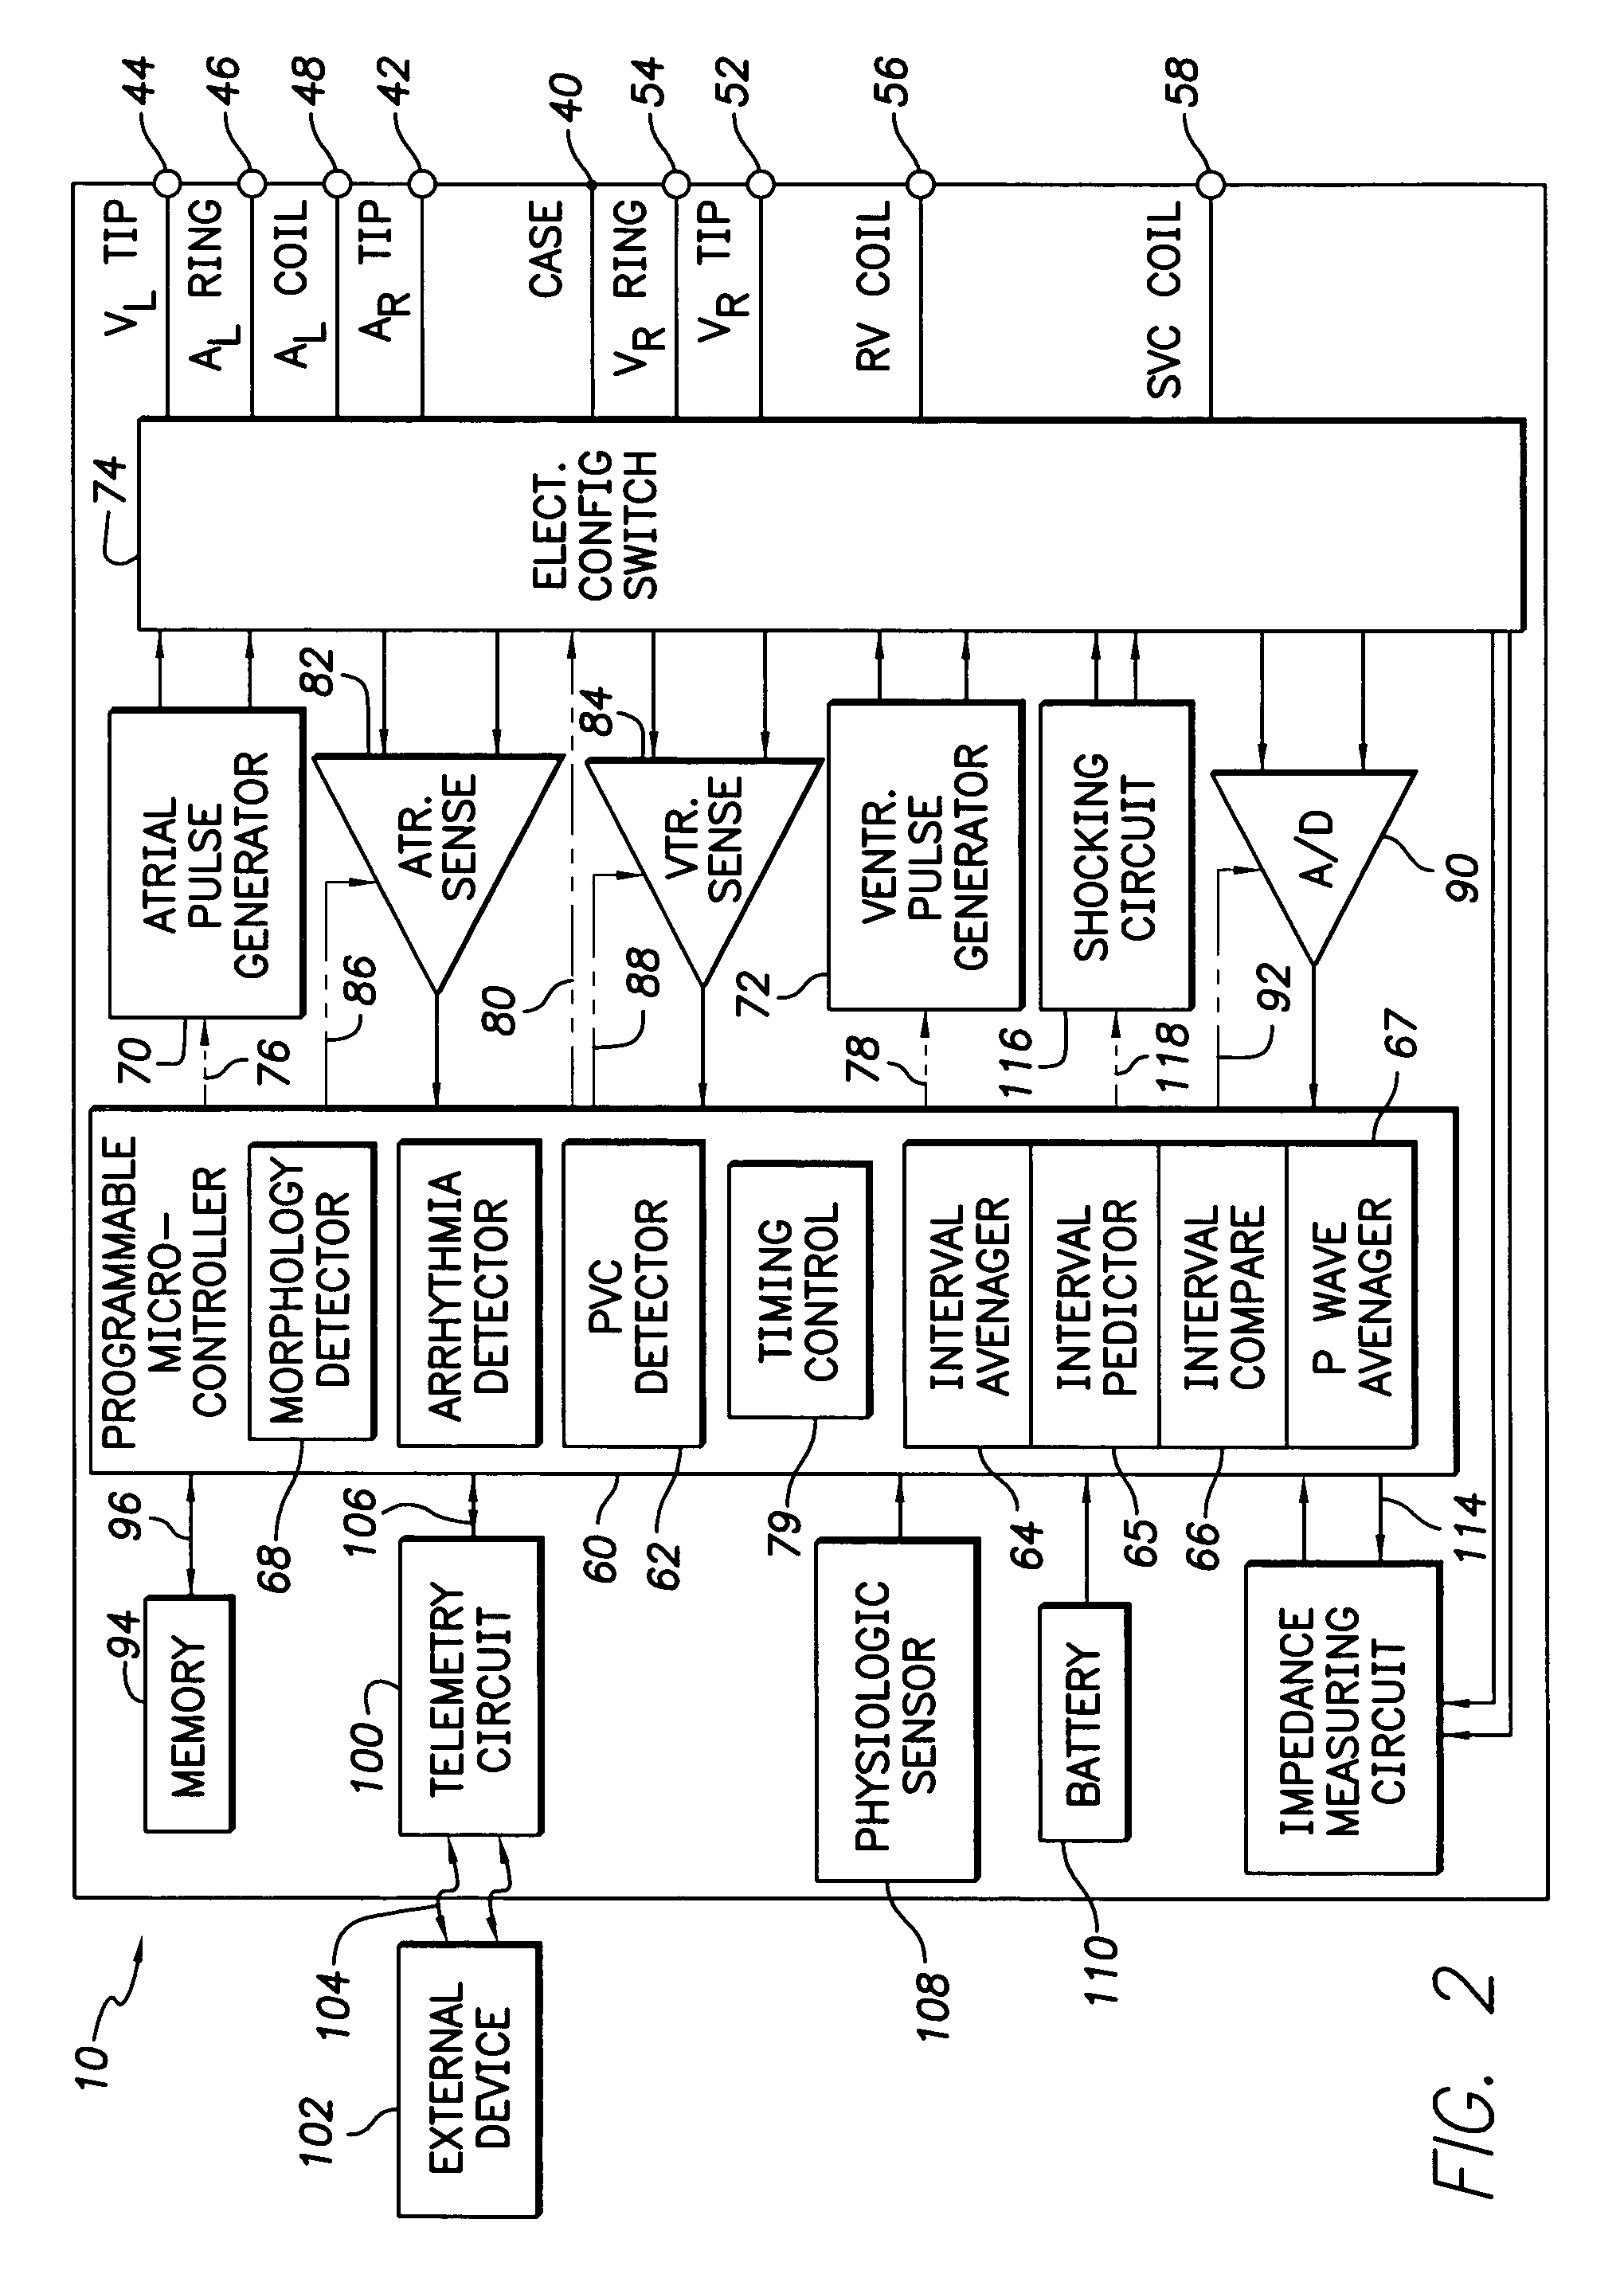 Cardiac stimulation device with selective atrial pacing on premature ventricular complex detection and method